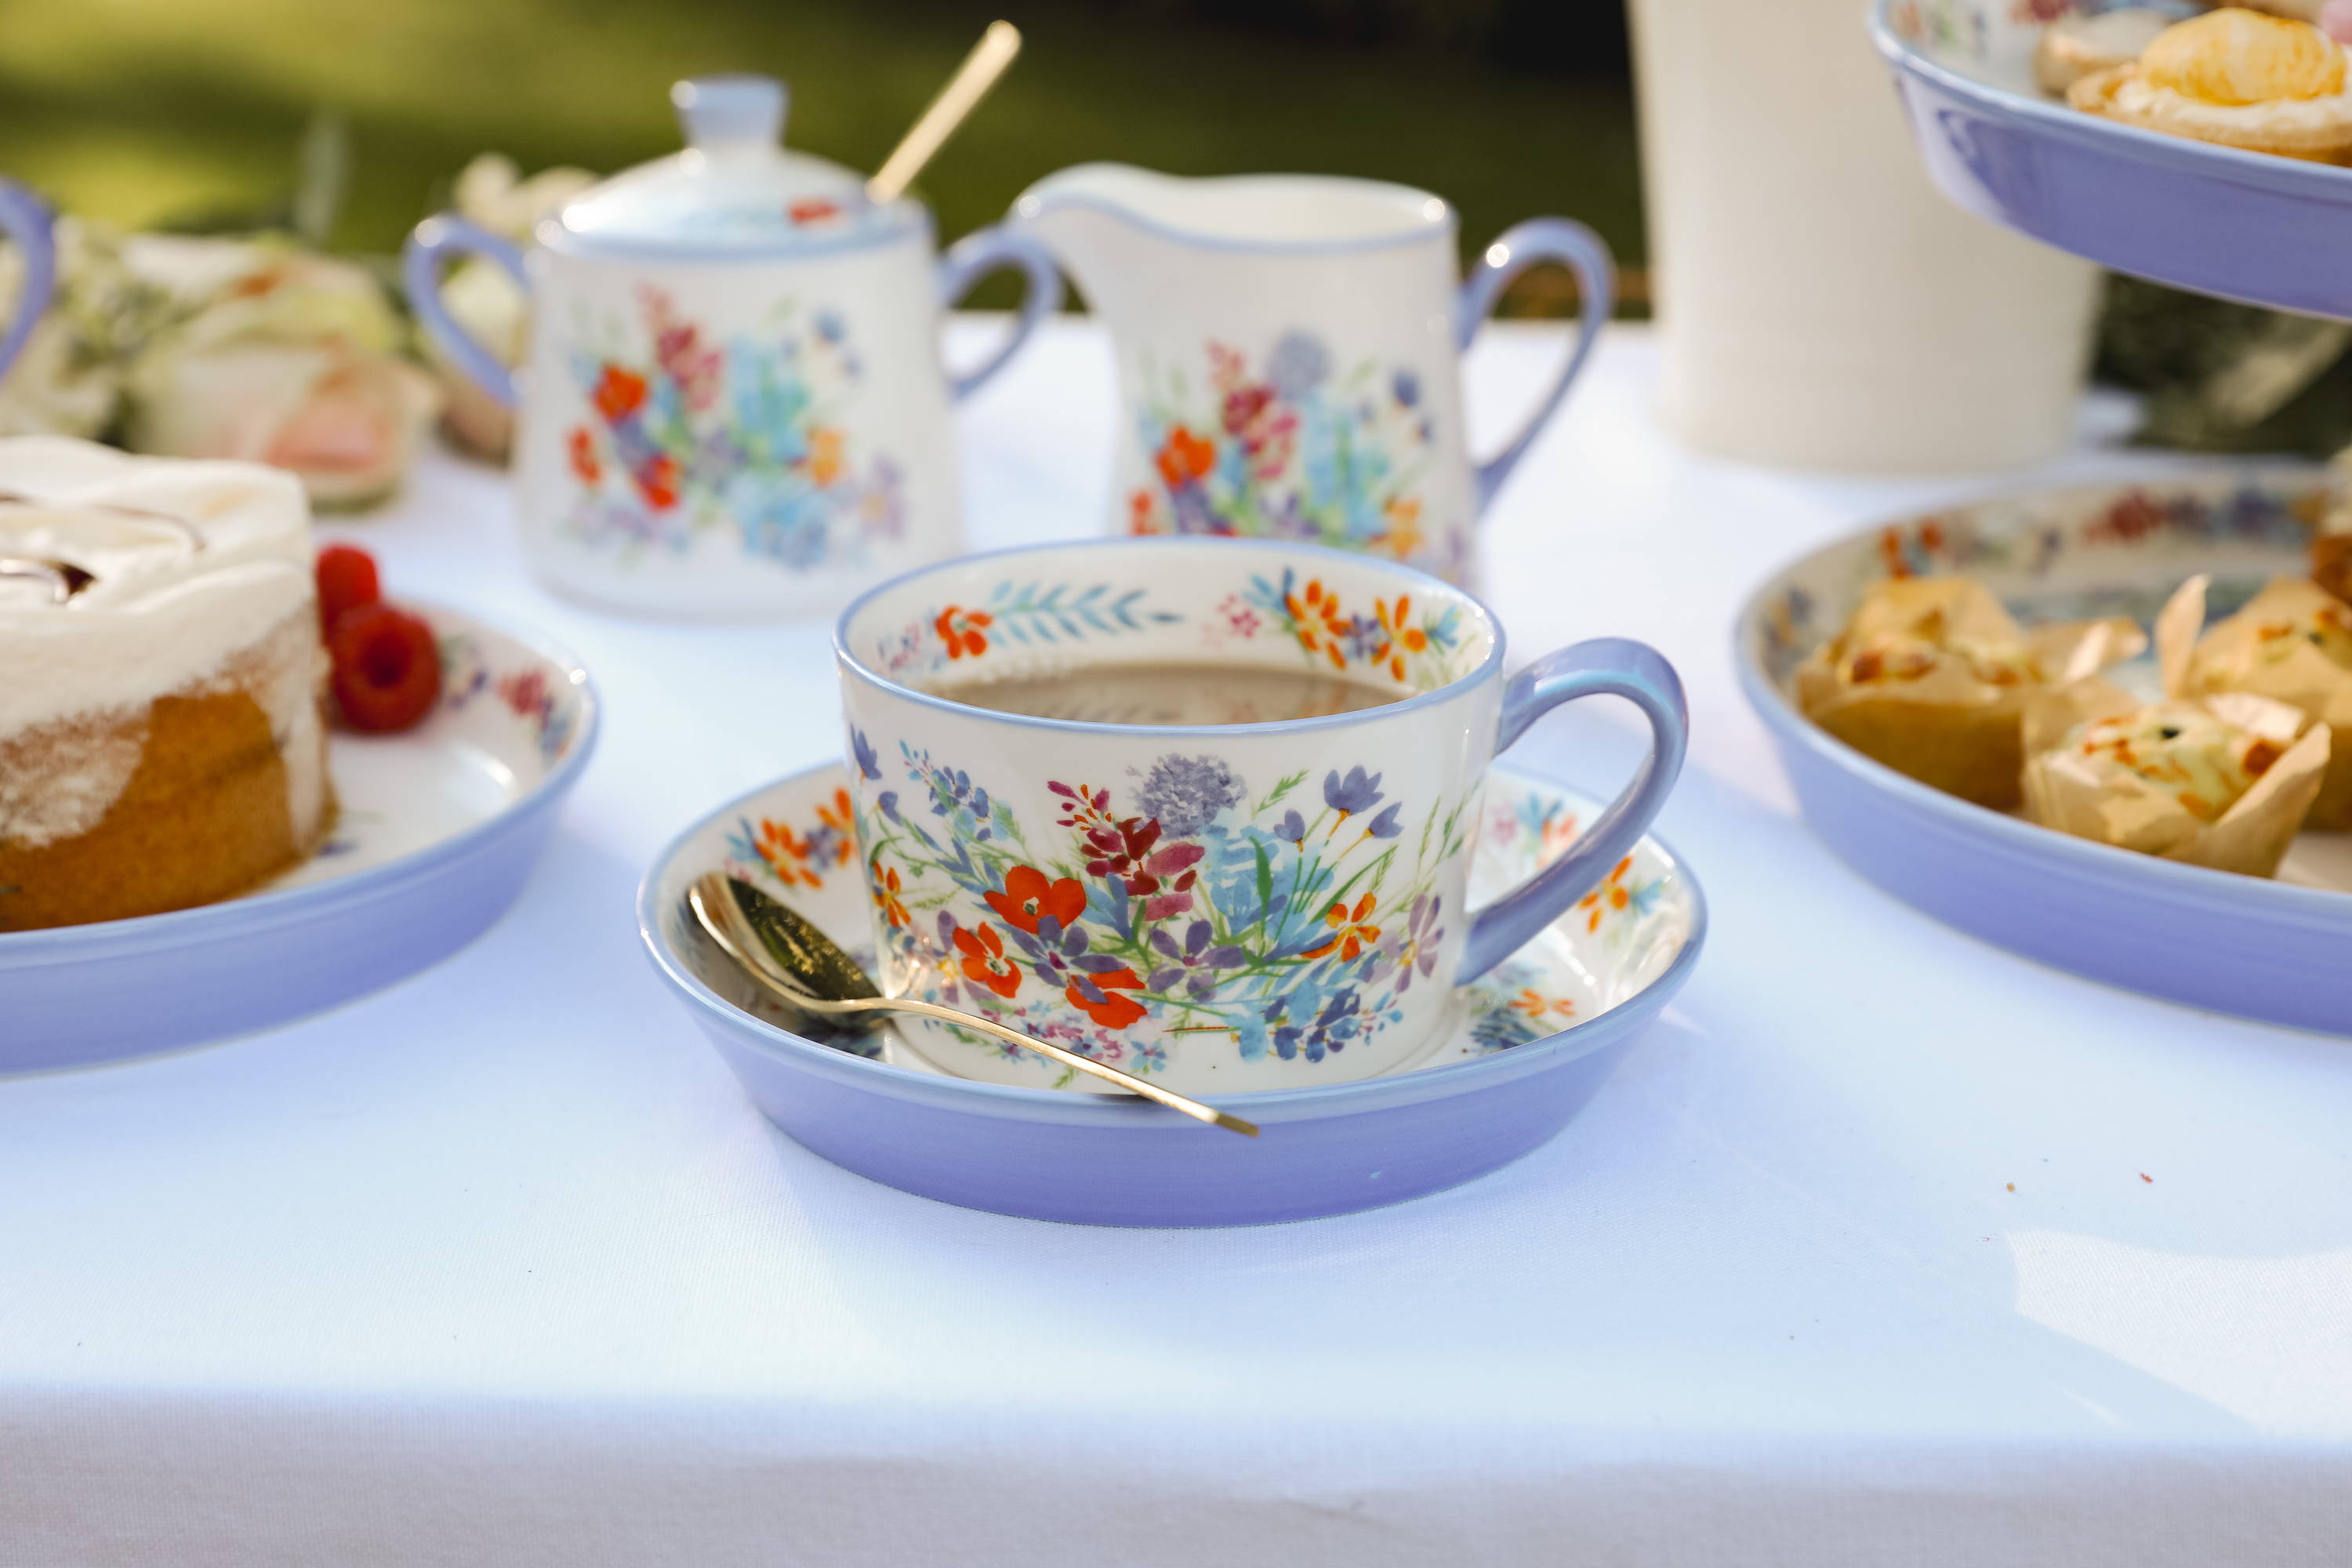 A tea cup and saucer on a table outside, surrounded by cakes and food.